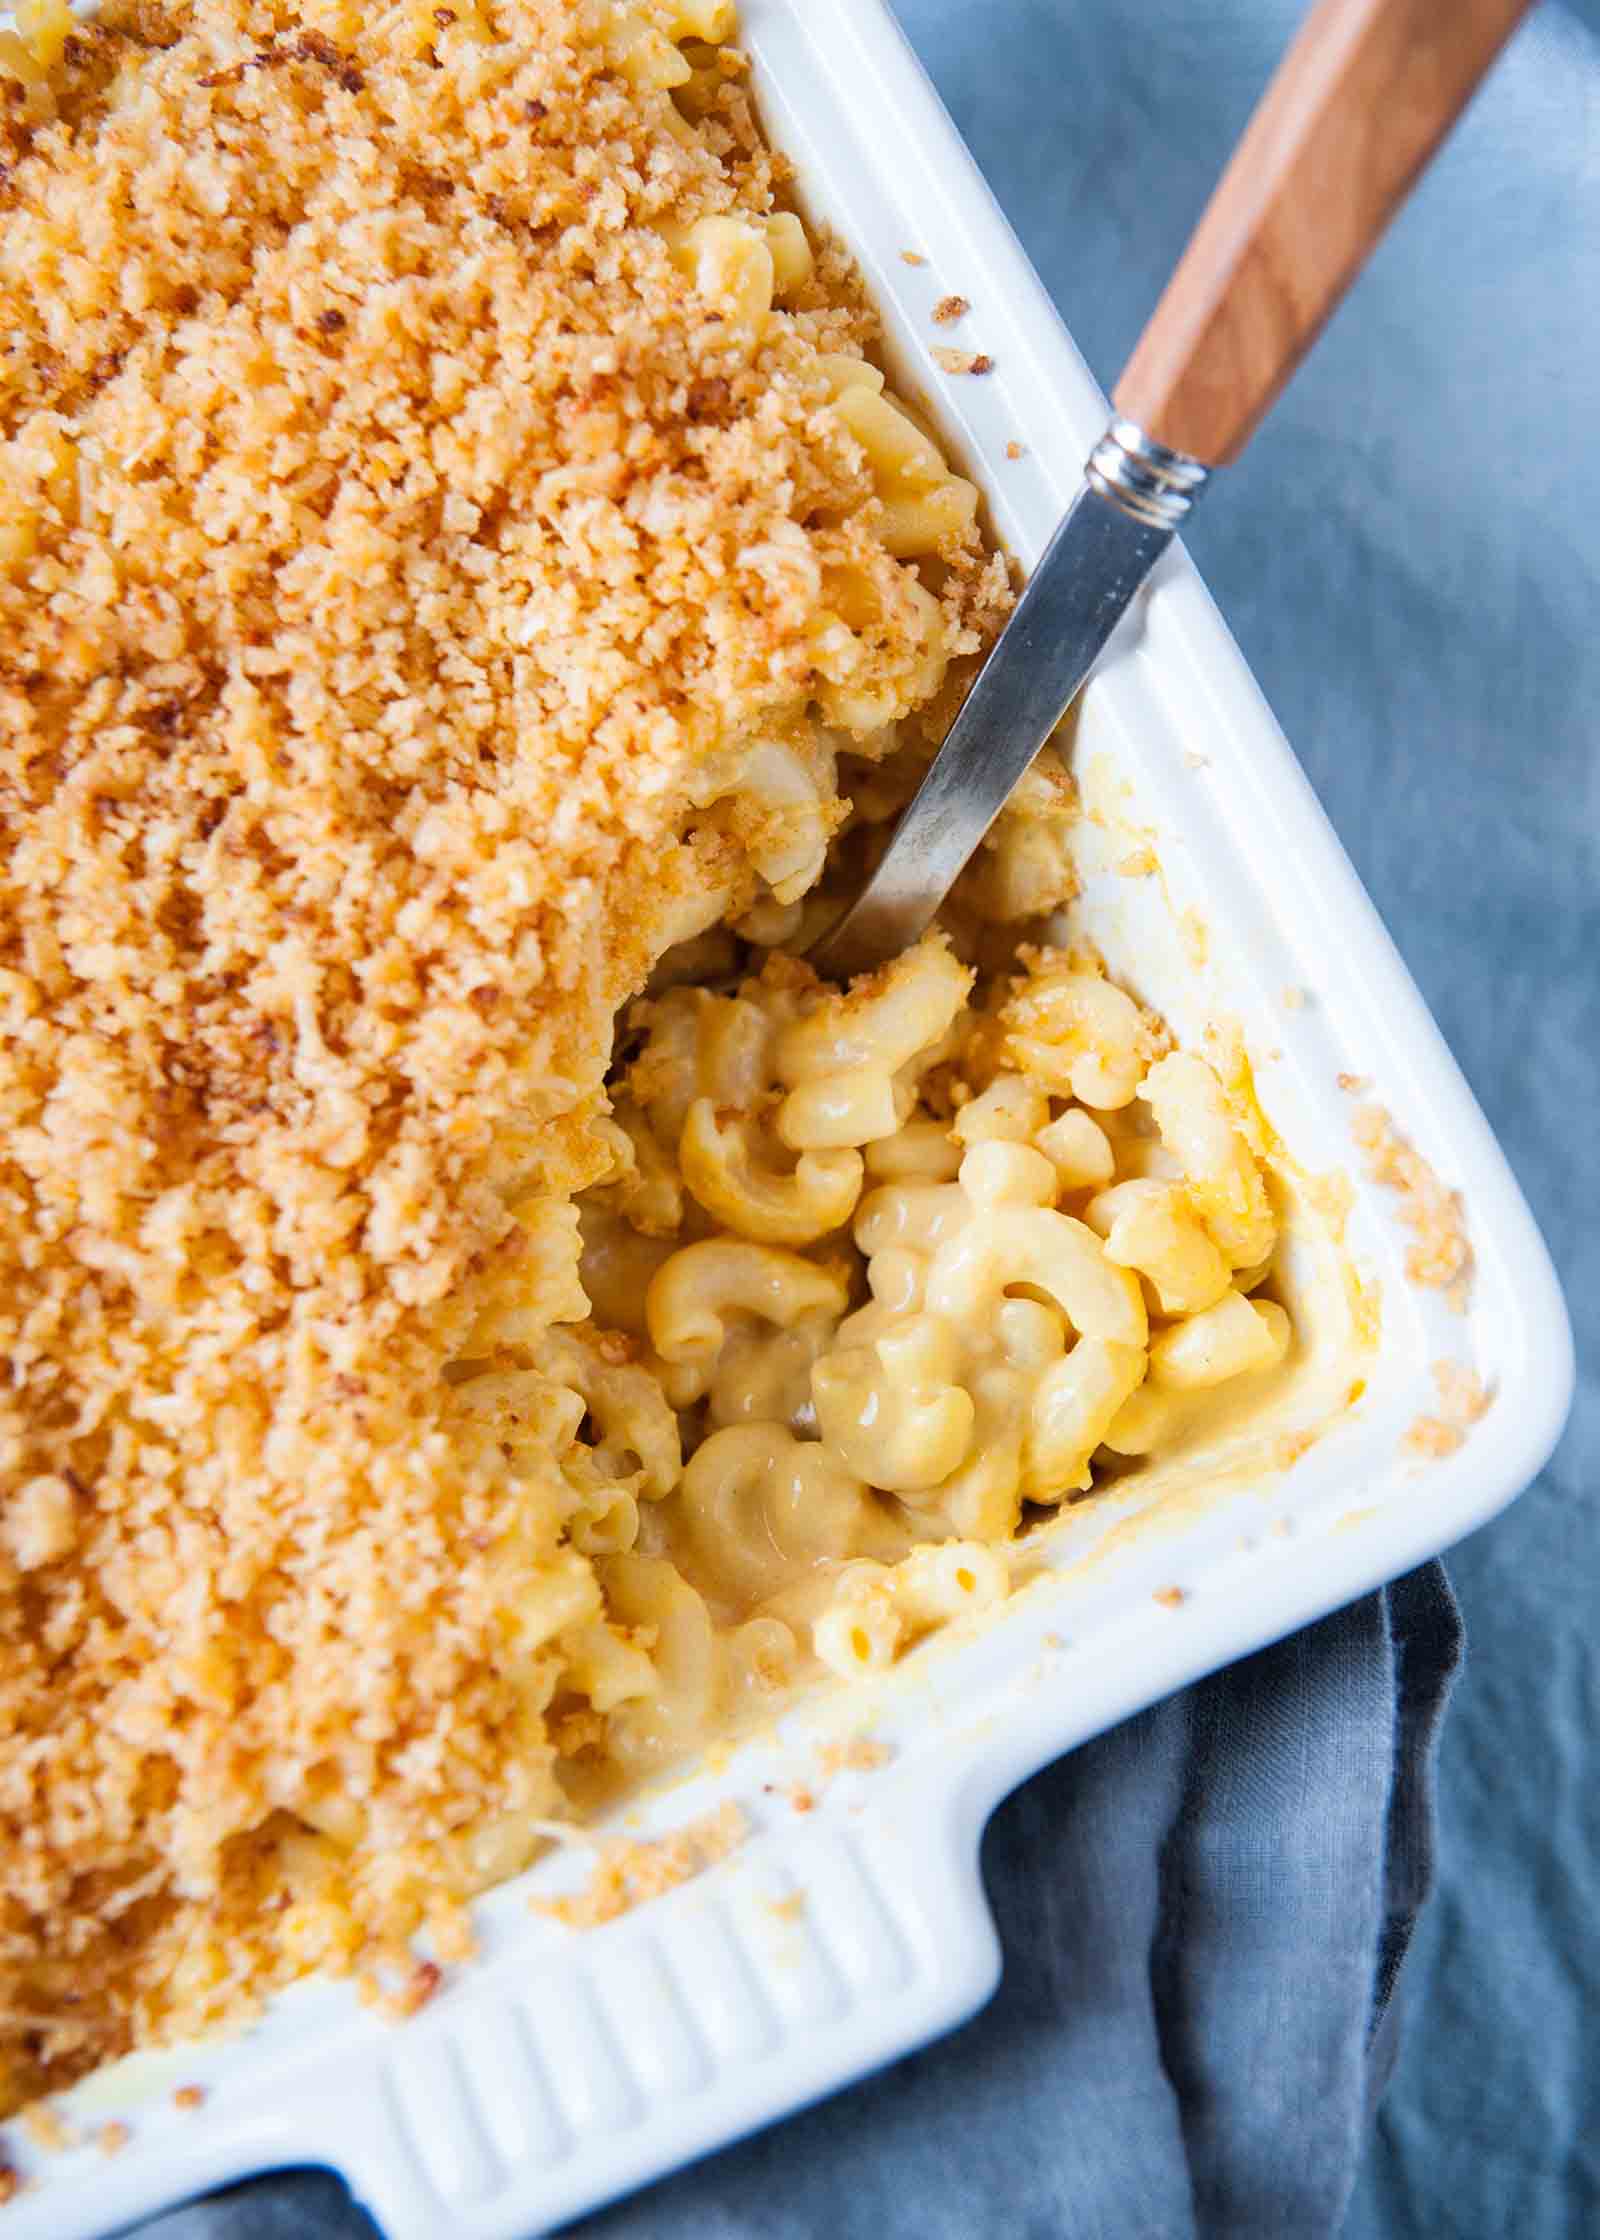 Ingredients for baked mac and cheese recipe with bread crumbs